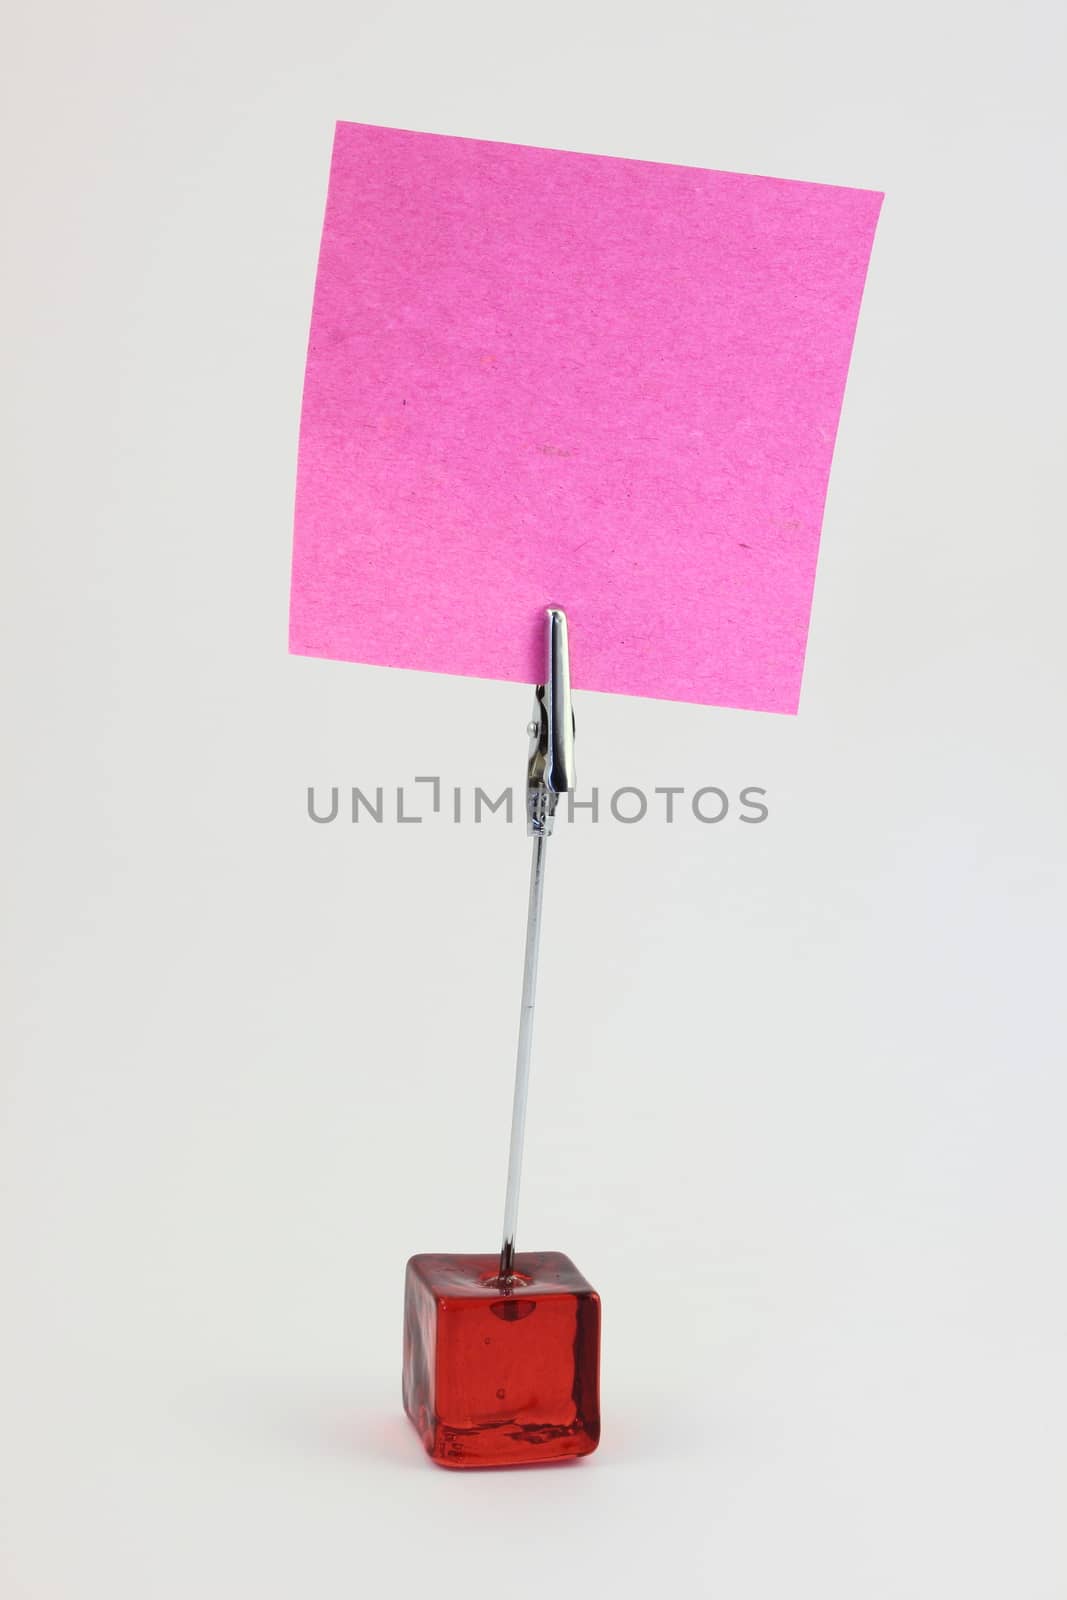 Red glass note-holder with alligator clip and blank pink note by HoleInTheBox